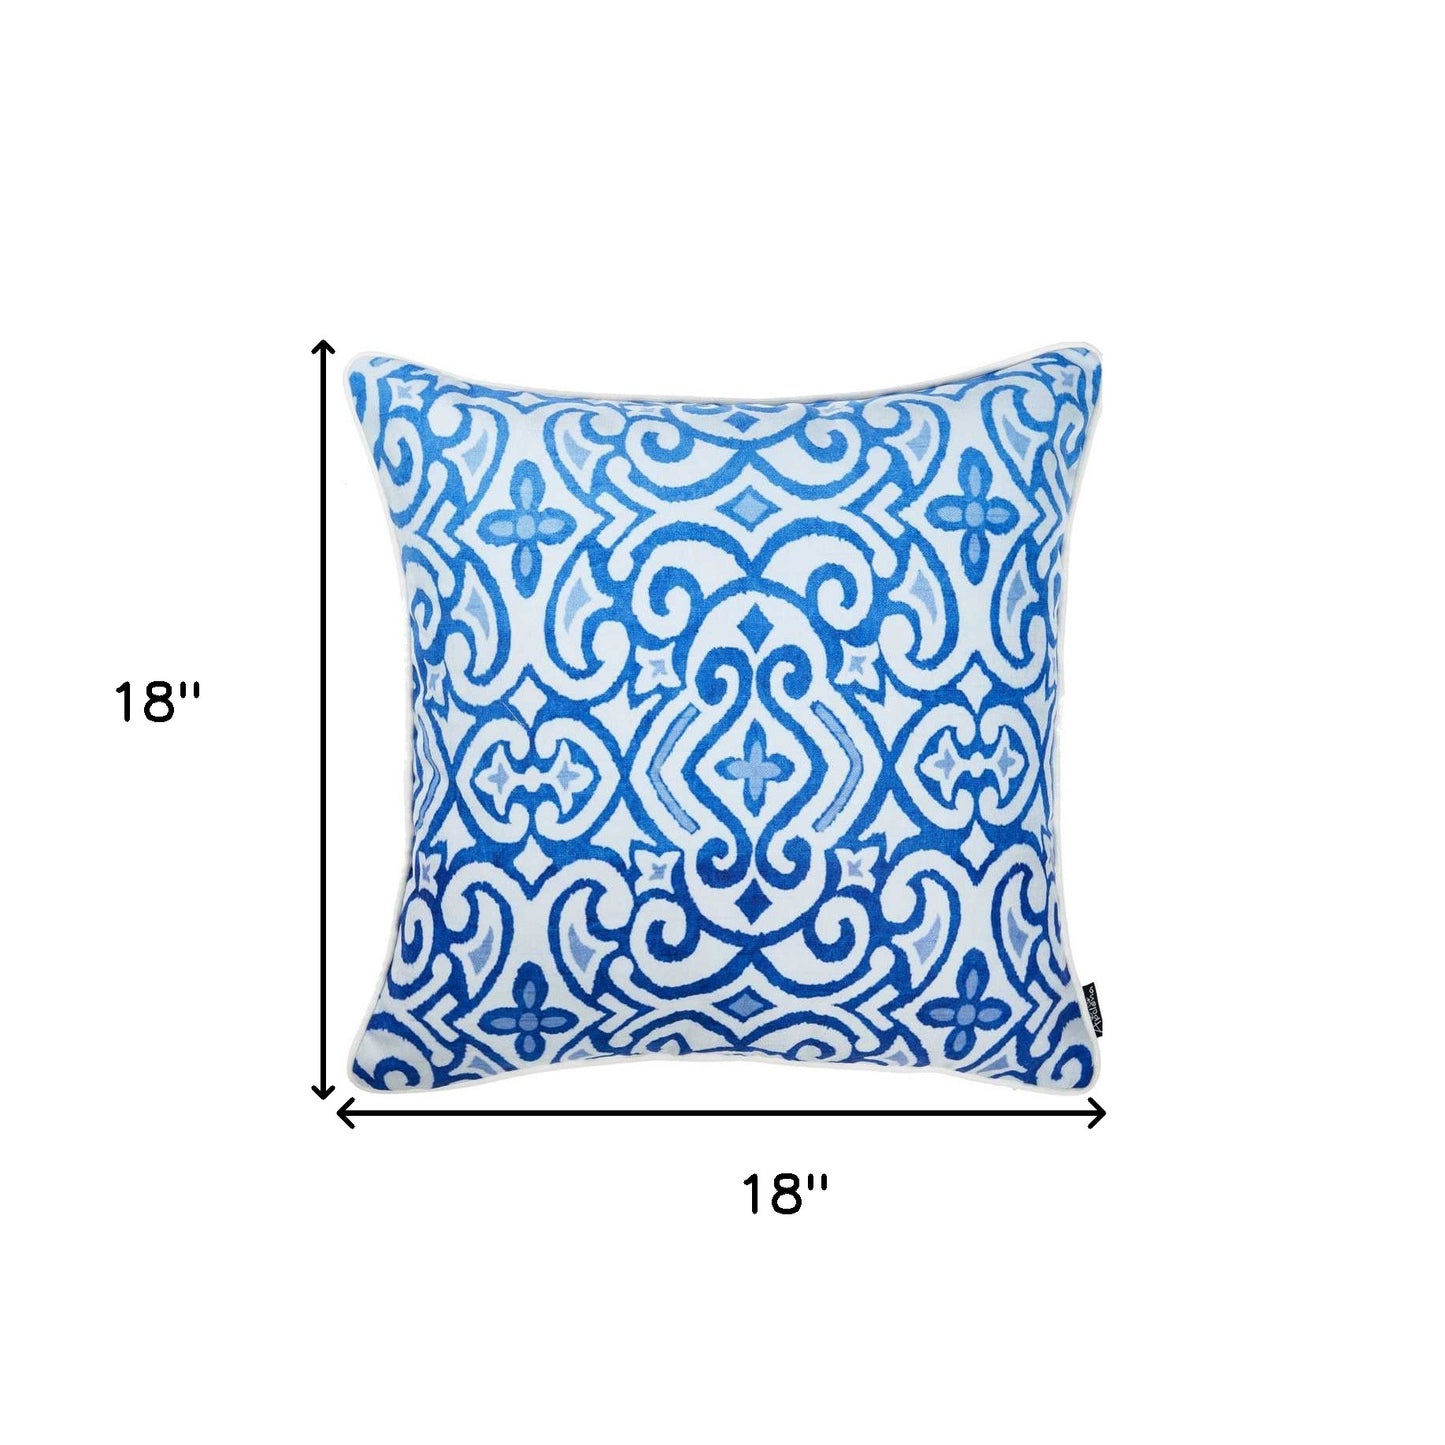 18"X 18" Blue Sky Scroll Decorative Throw Pillow Cover Printed